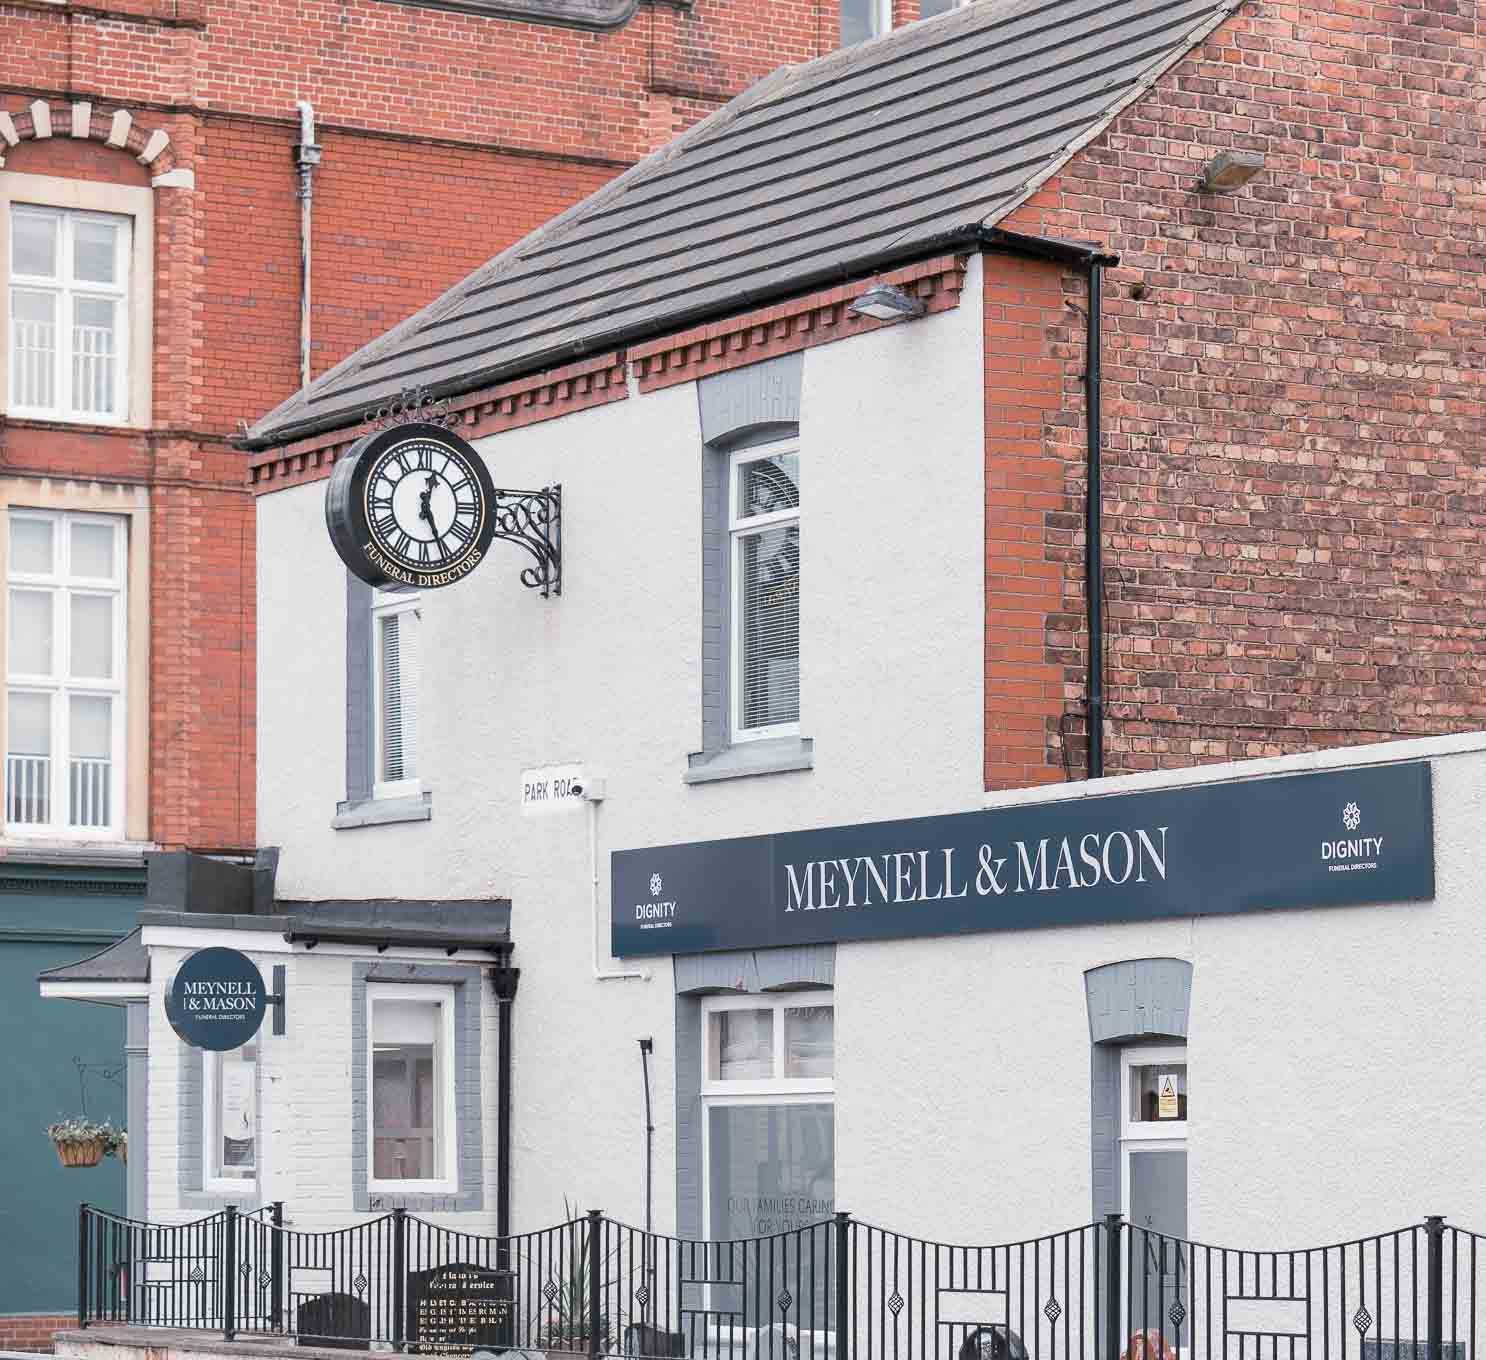 Meynell and Mason Funeral Home Hartlepool on Park Road